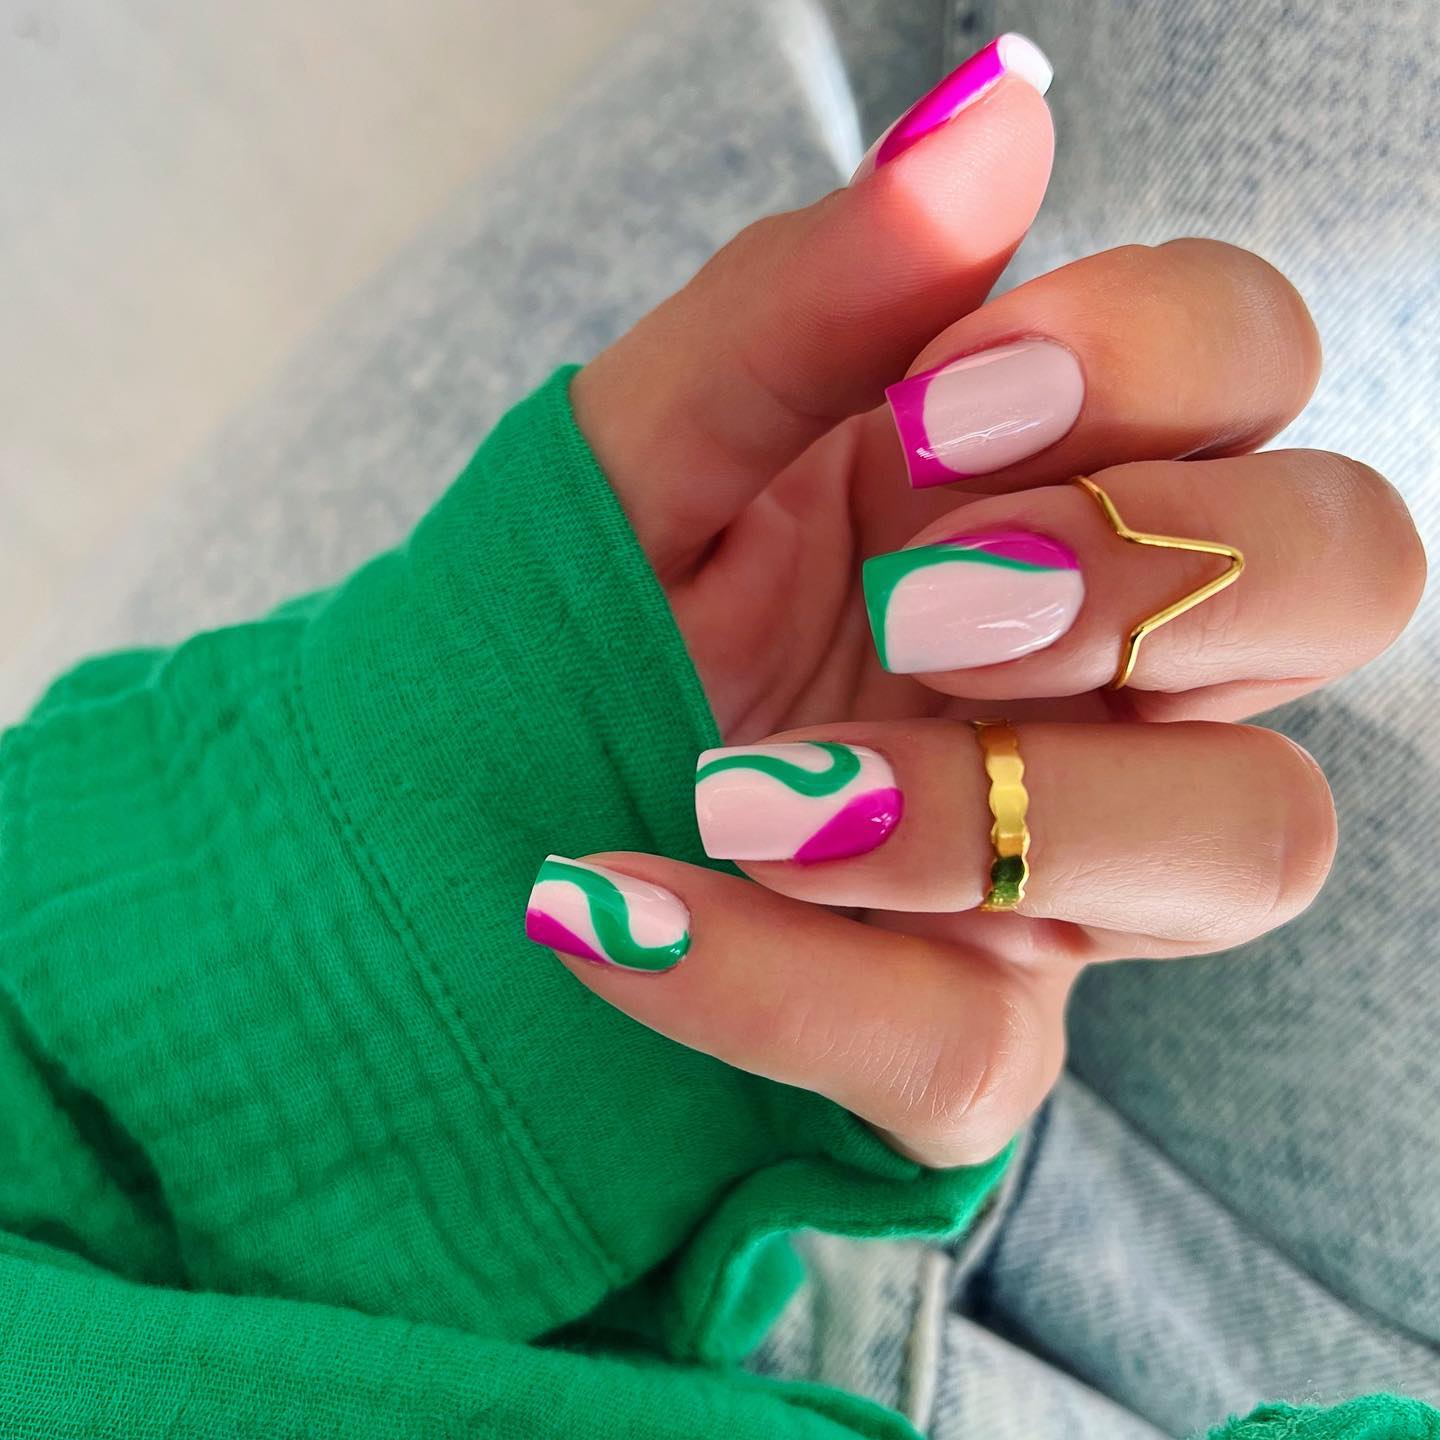  Here is a nice and unusual example of swirl nails. Dark pink and green nail polish go with each other on a pastel pink base.